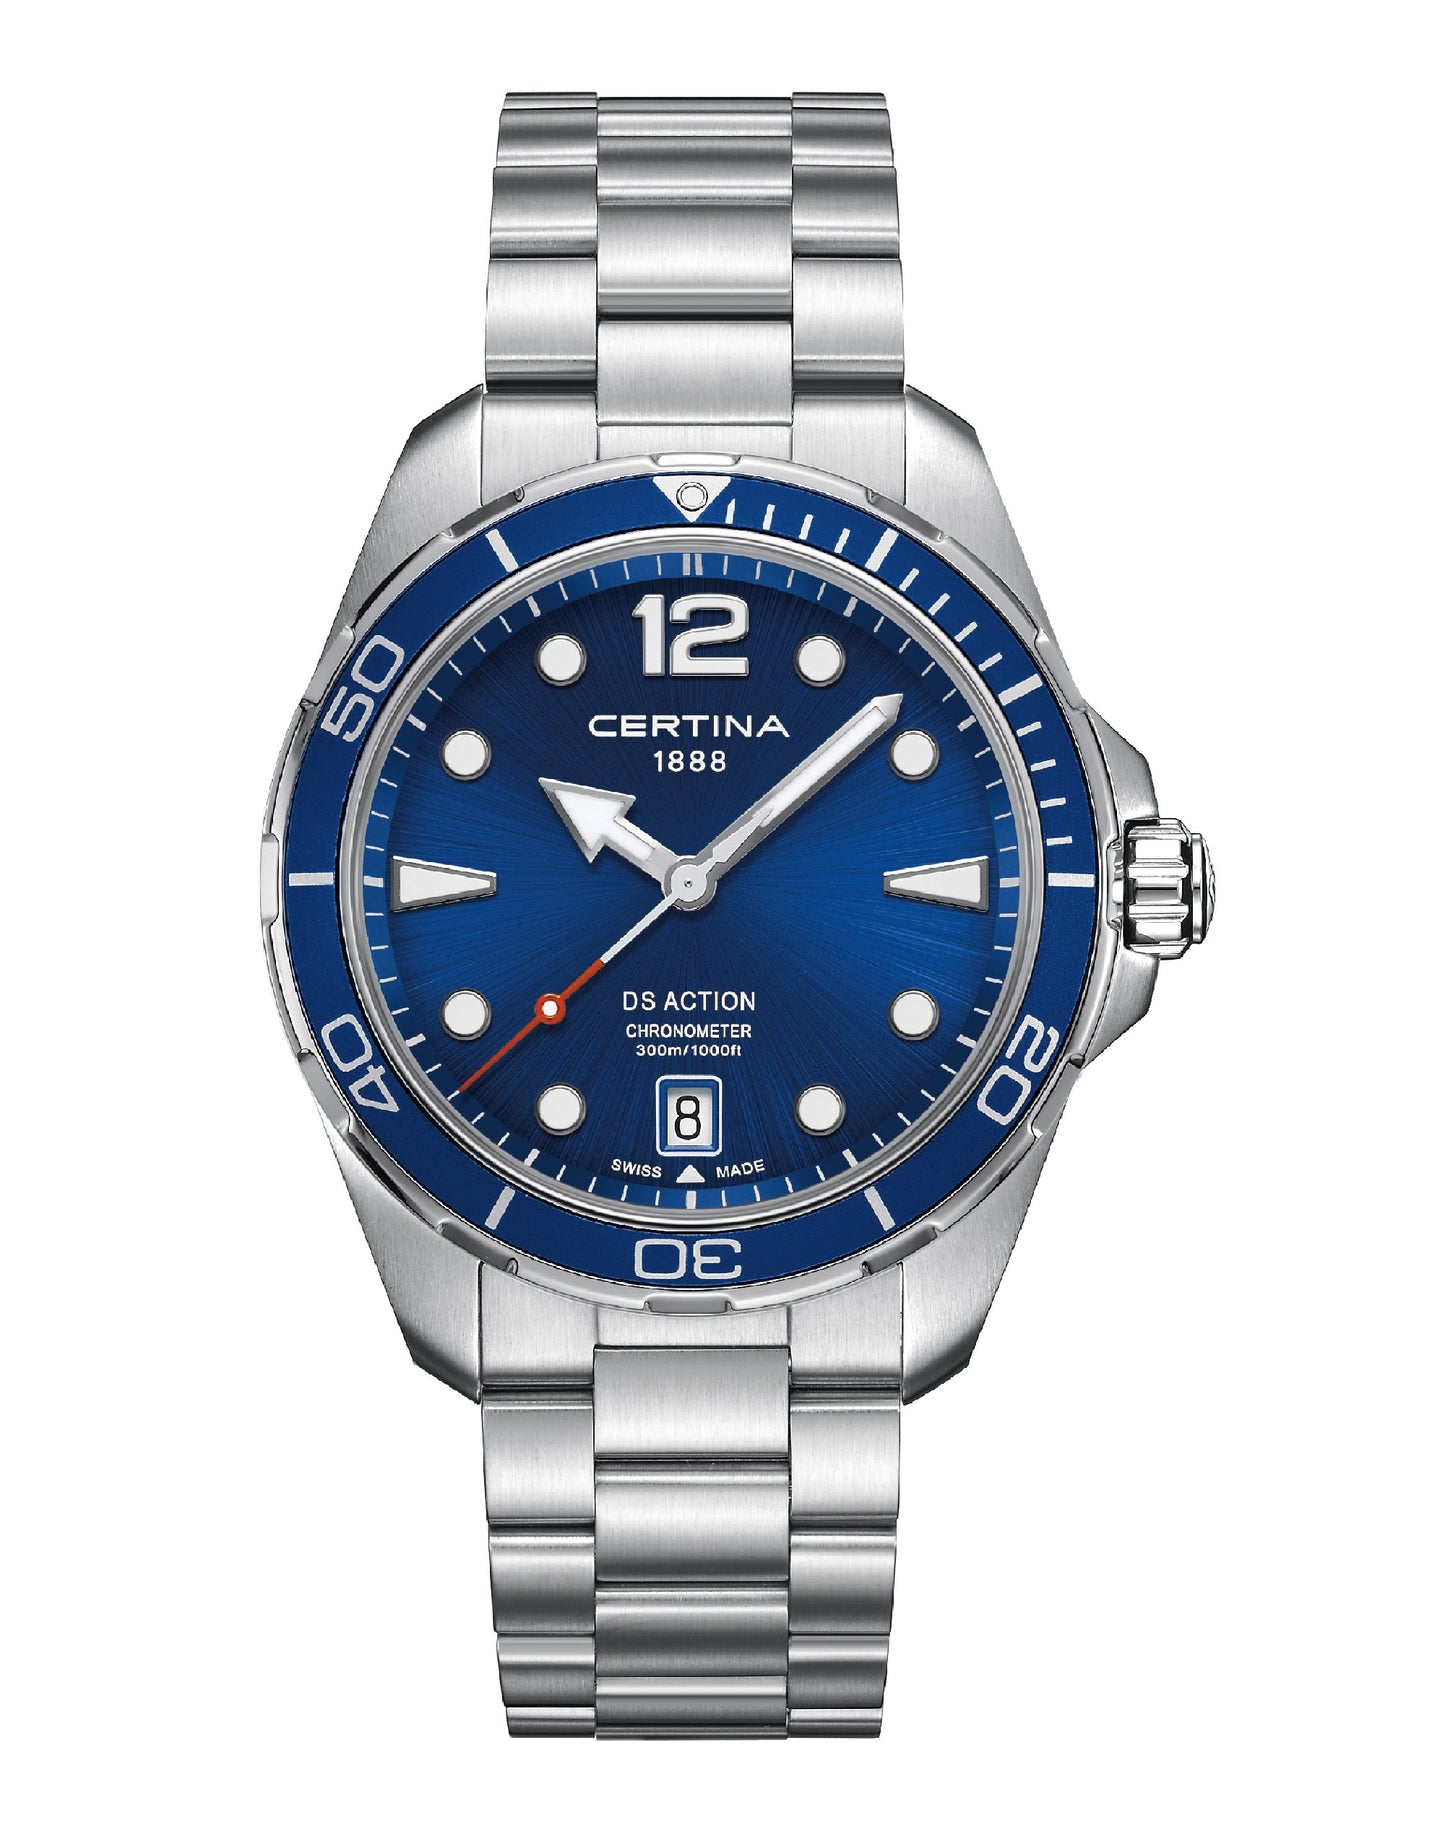 Certina C032.451.11.047.00 Certina DS Action Diver BLUE DIAL 43mm Watch